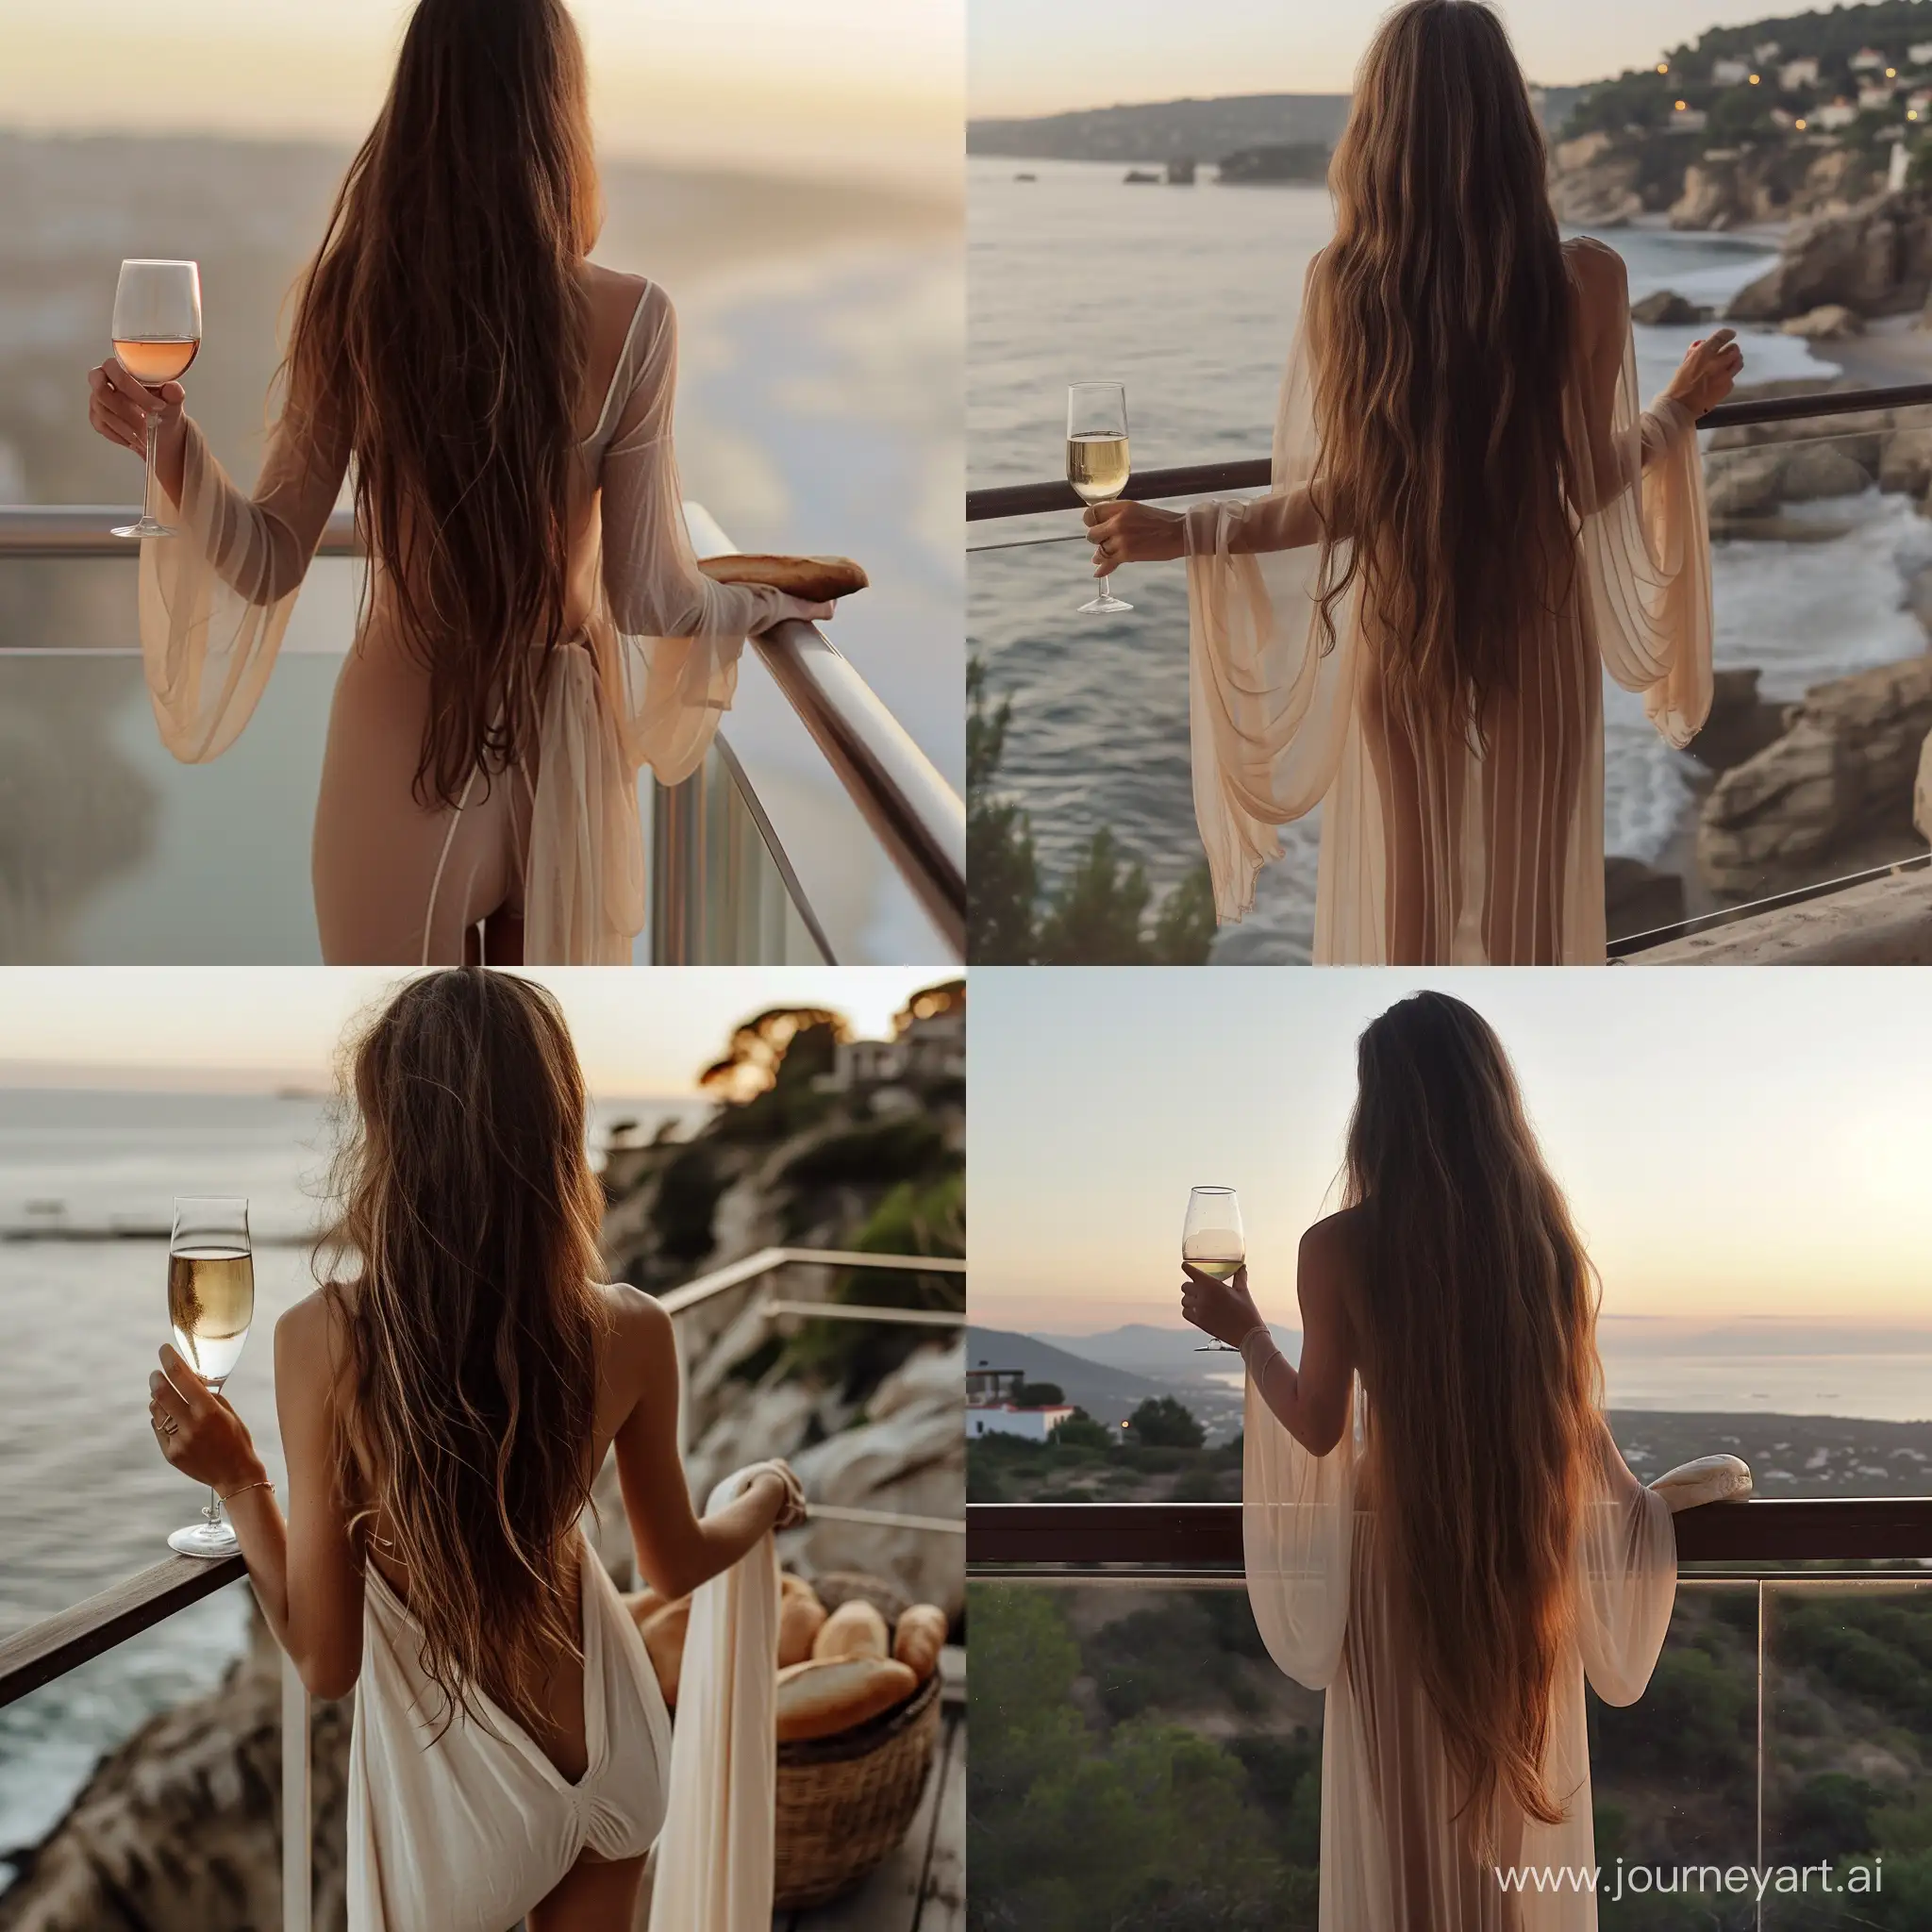 Hour glass physique, model that doesn’t exist in real life, standing on a balcony holding a glass of wine, Pinterest, aestheticism, long thin brown hair, beach aesthetic, long elegant thin and simple white bread, light half opened dress, close up to a skinny, view from behind, dressed with long fluent clothes, early morning